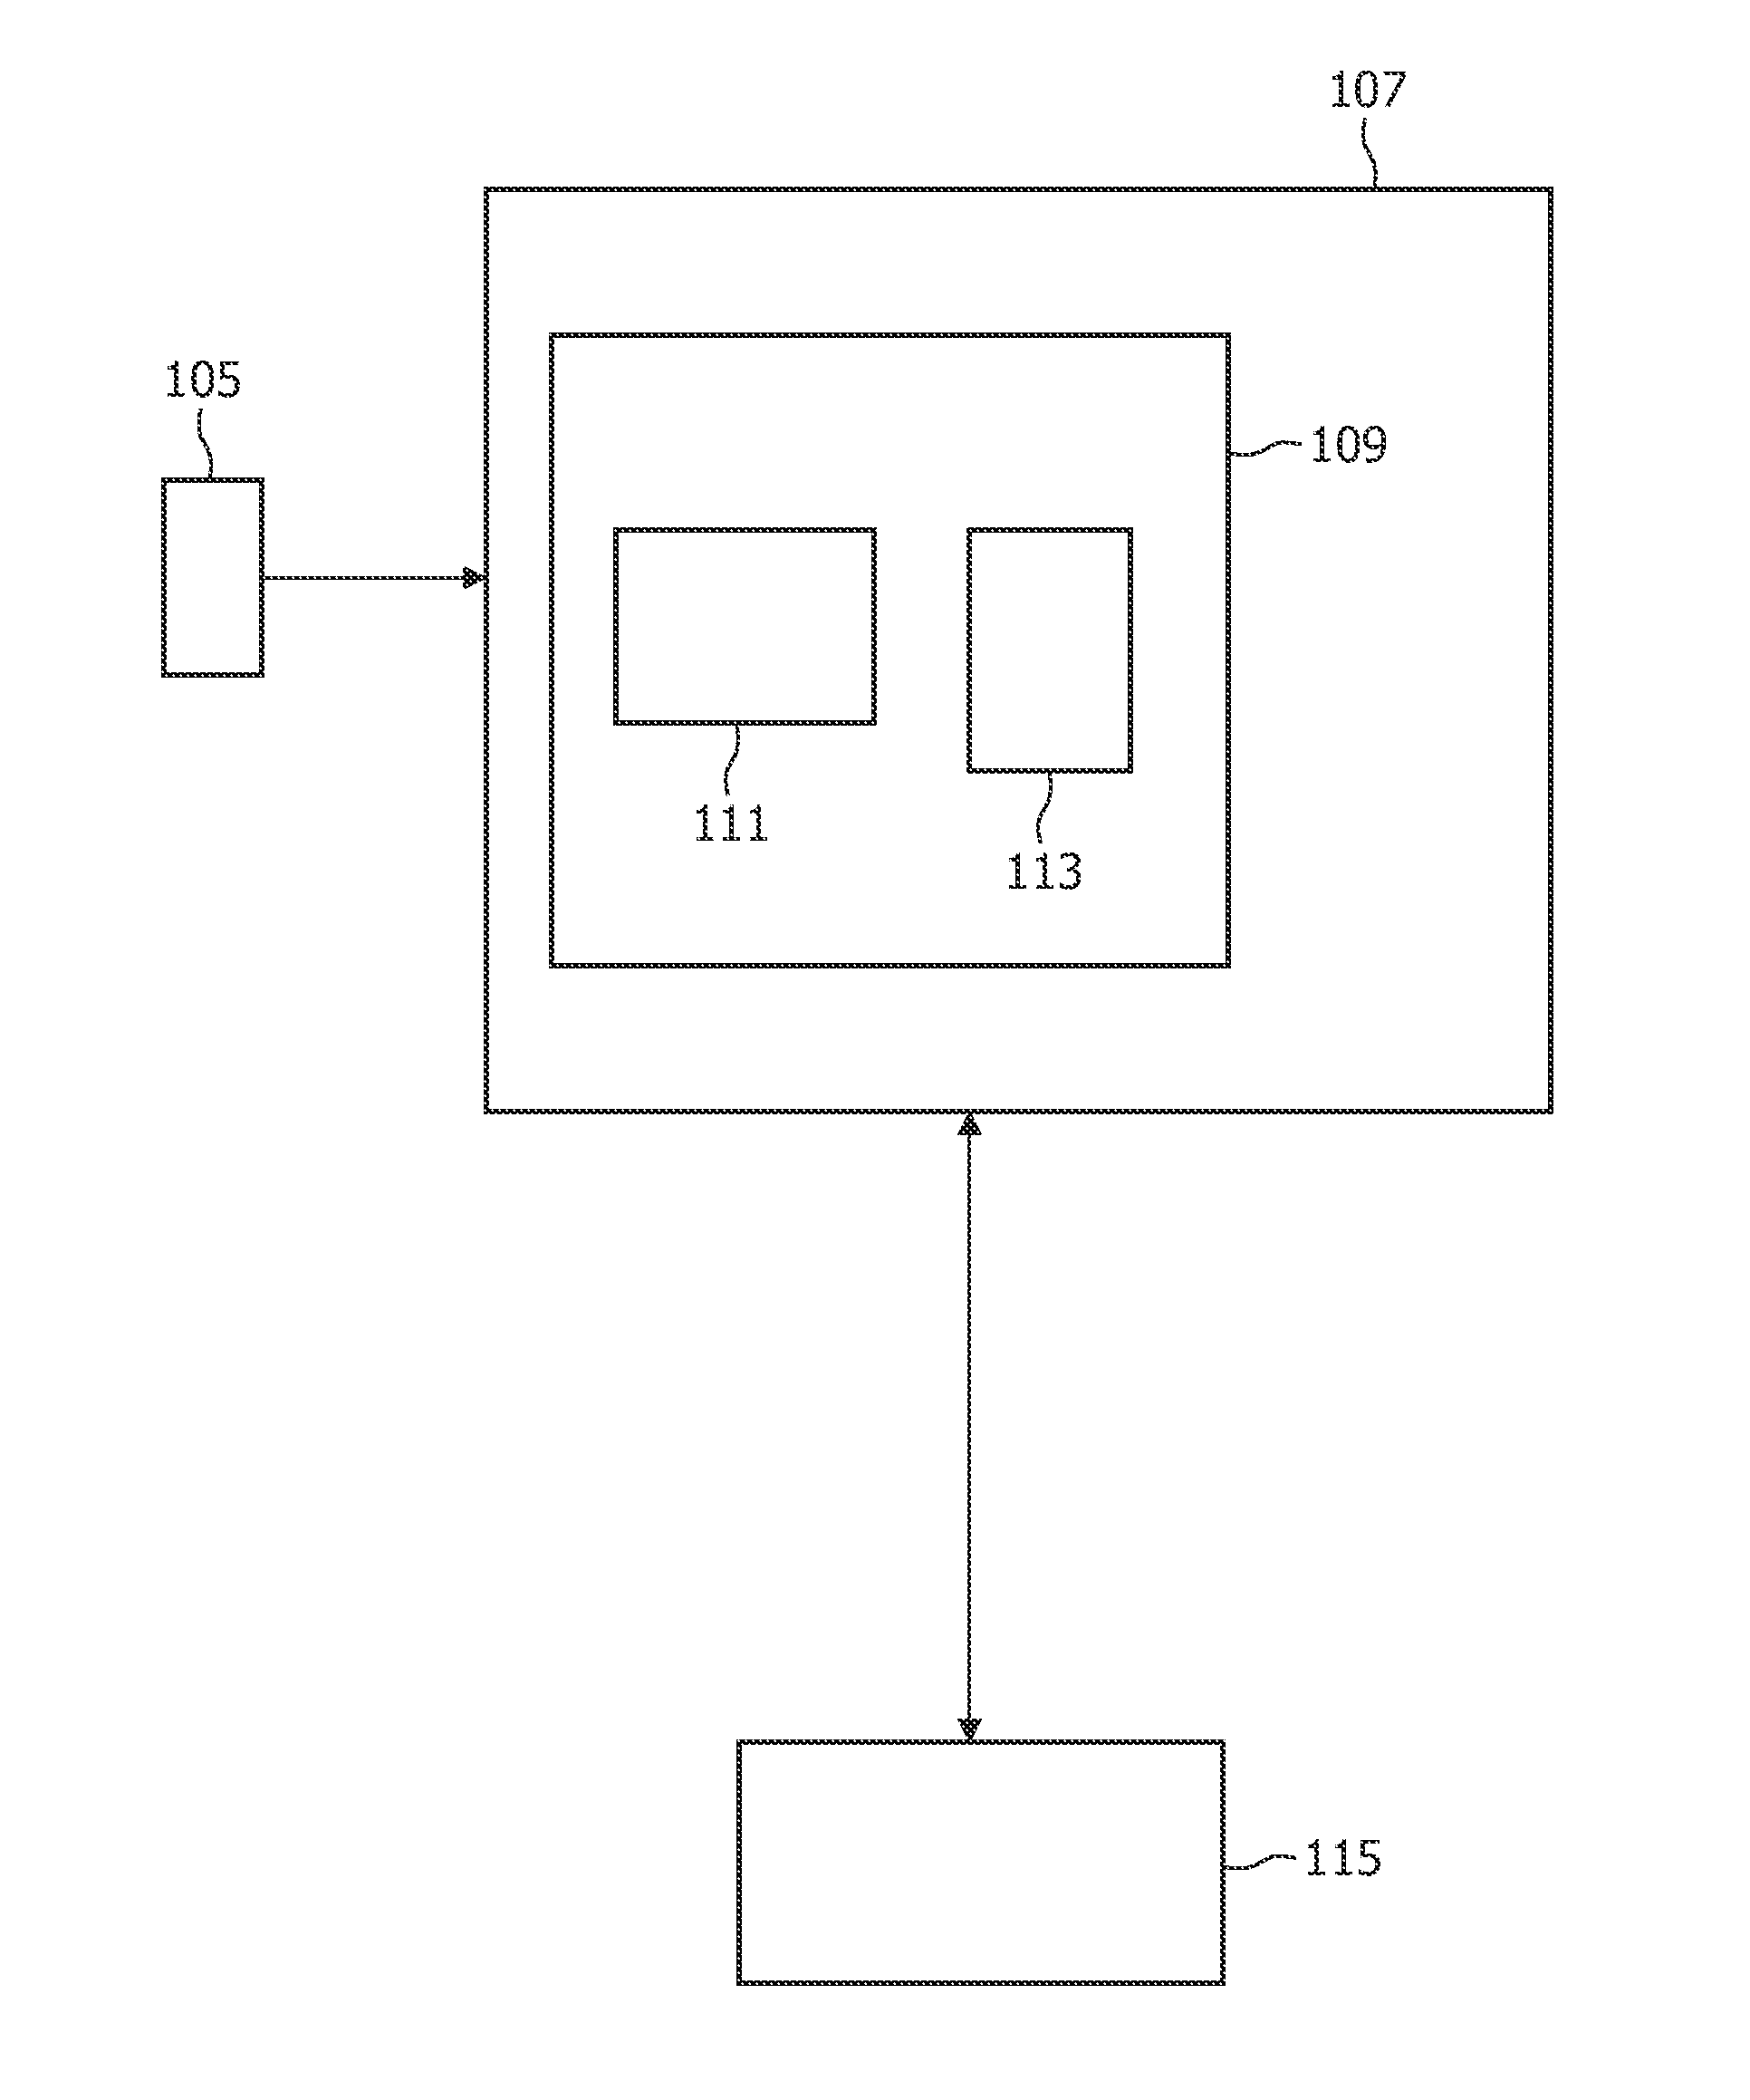 Method for determining the position of an object in a structure